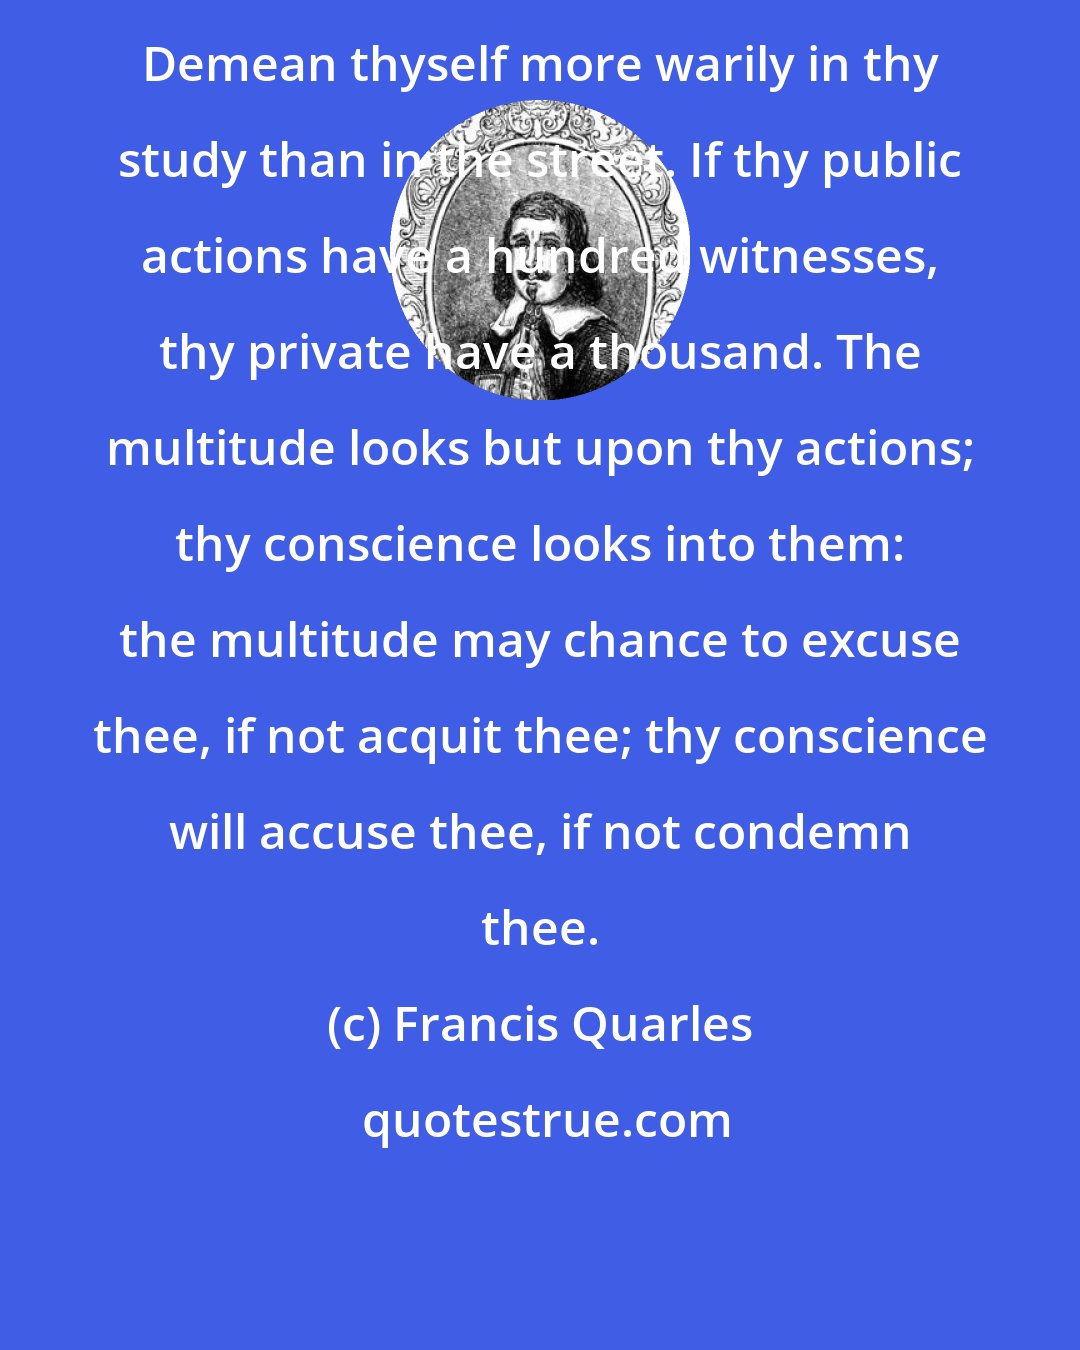 Francis Quarles: Demean thyself more warily in thy study than in the street. If thy public actions have a hundred witnesses, thy private have a thousand. The multitude looks but upon thy actions; thy conscience looks into them: the multitude may chance to excuse thee, if not acquit thee; thy conscience will accuse thee, if not condemn thee.